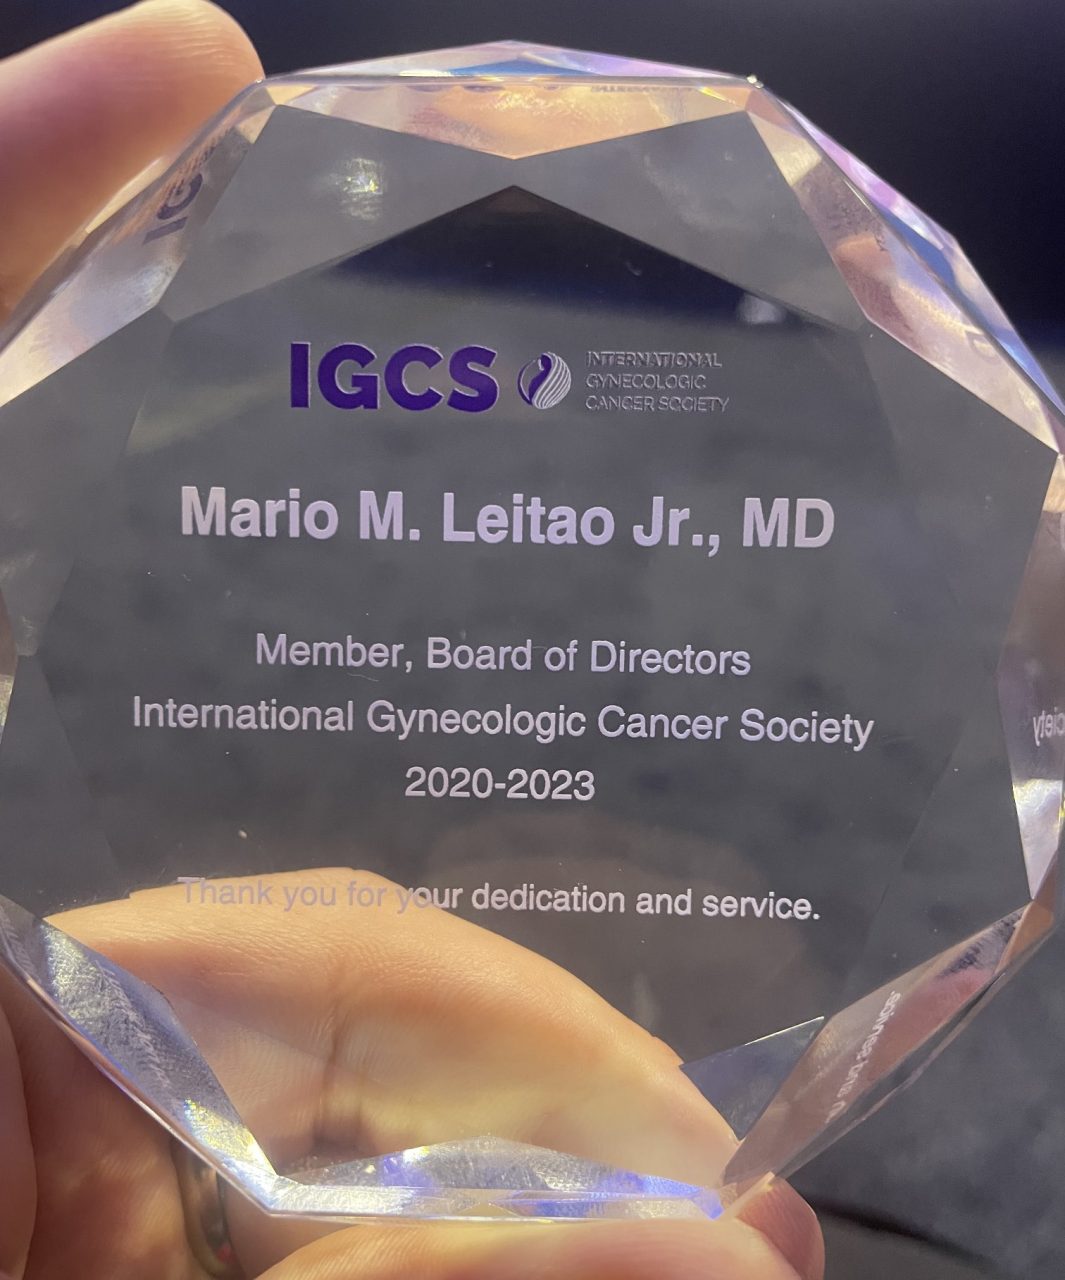 Mario M. Leitao: Was great privilege and honor to have served on the IGCS Board for these past 3 years